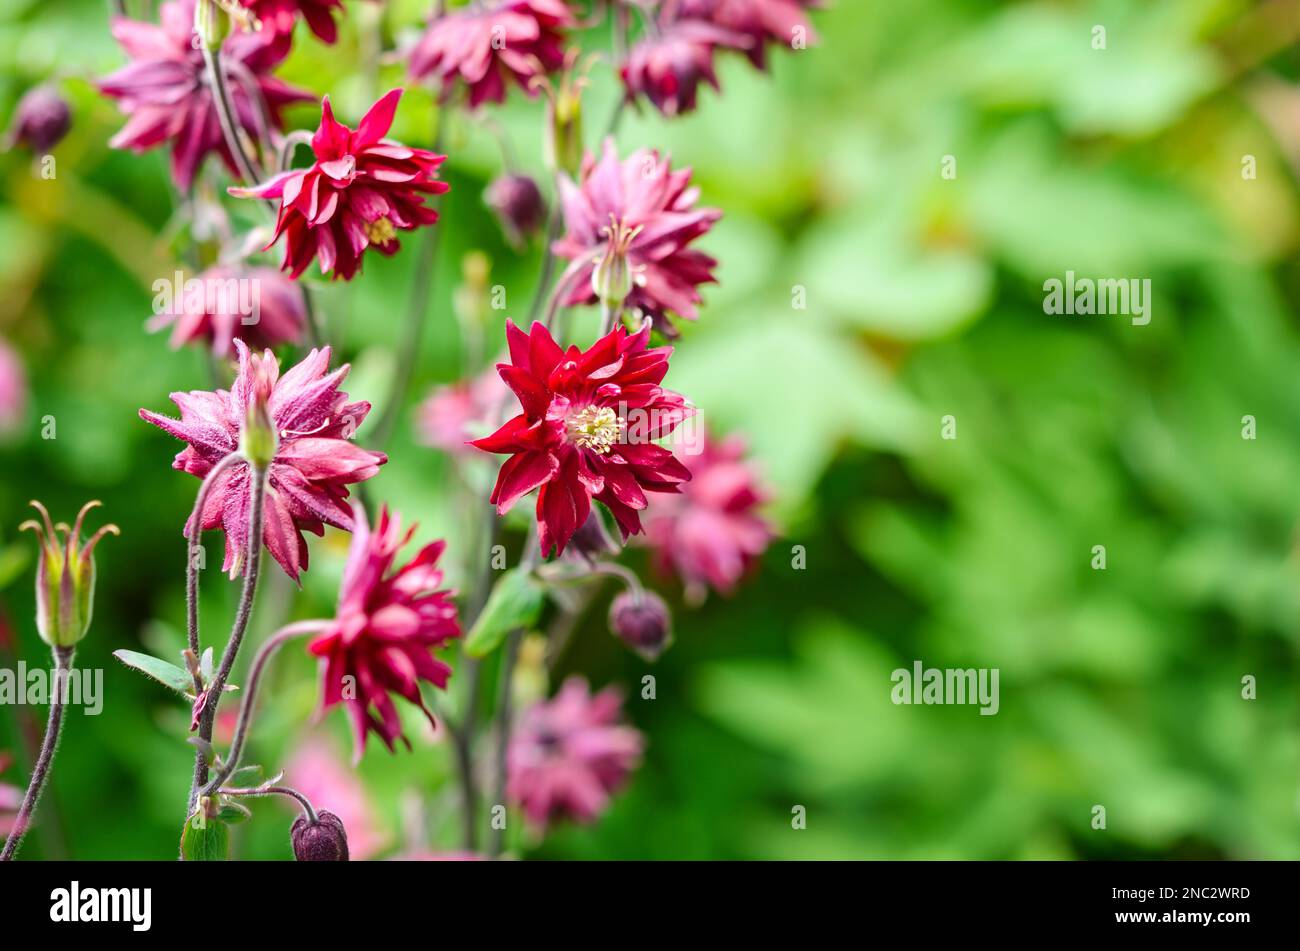 Beautiful Columbine or Aquilegia flowers in the flower garden. Selective focus with blurred background. Stock Photo